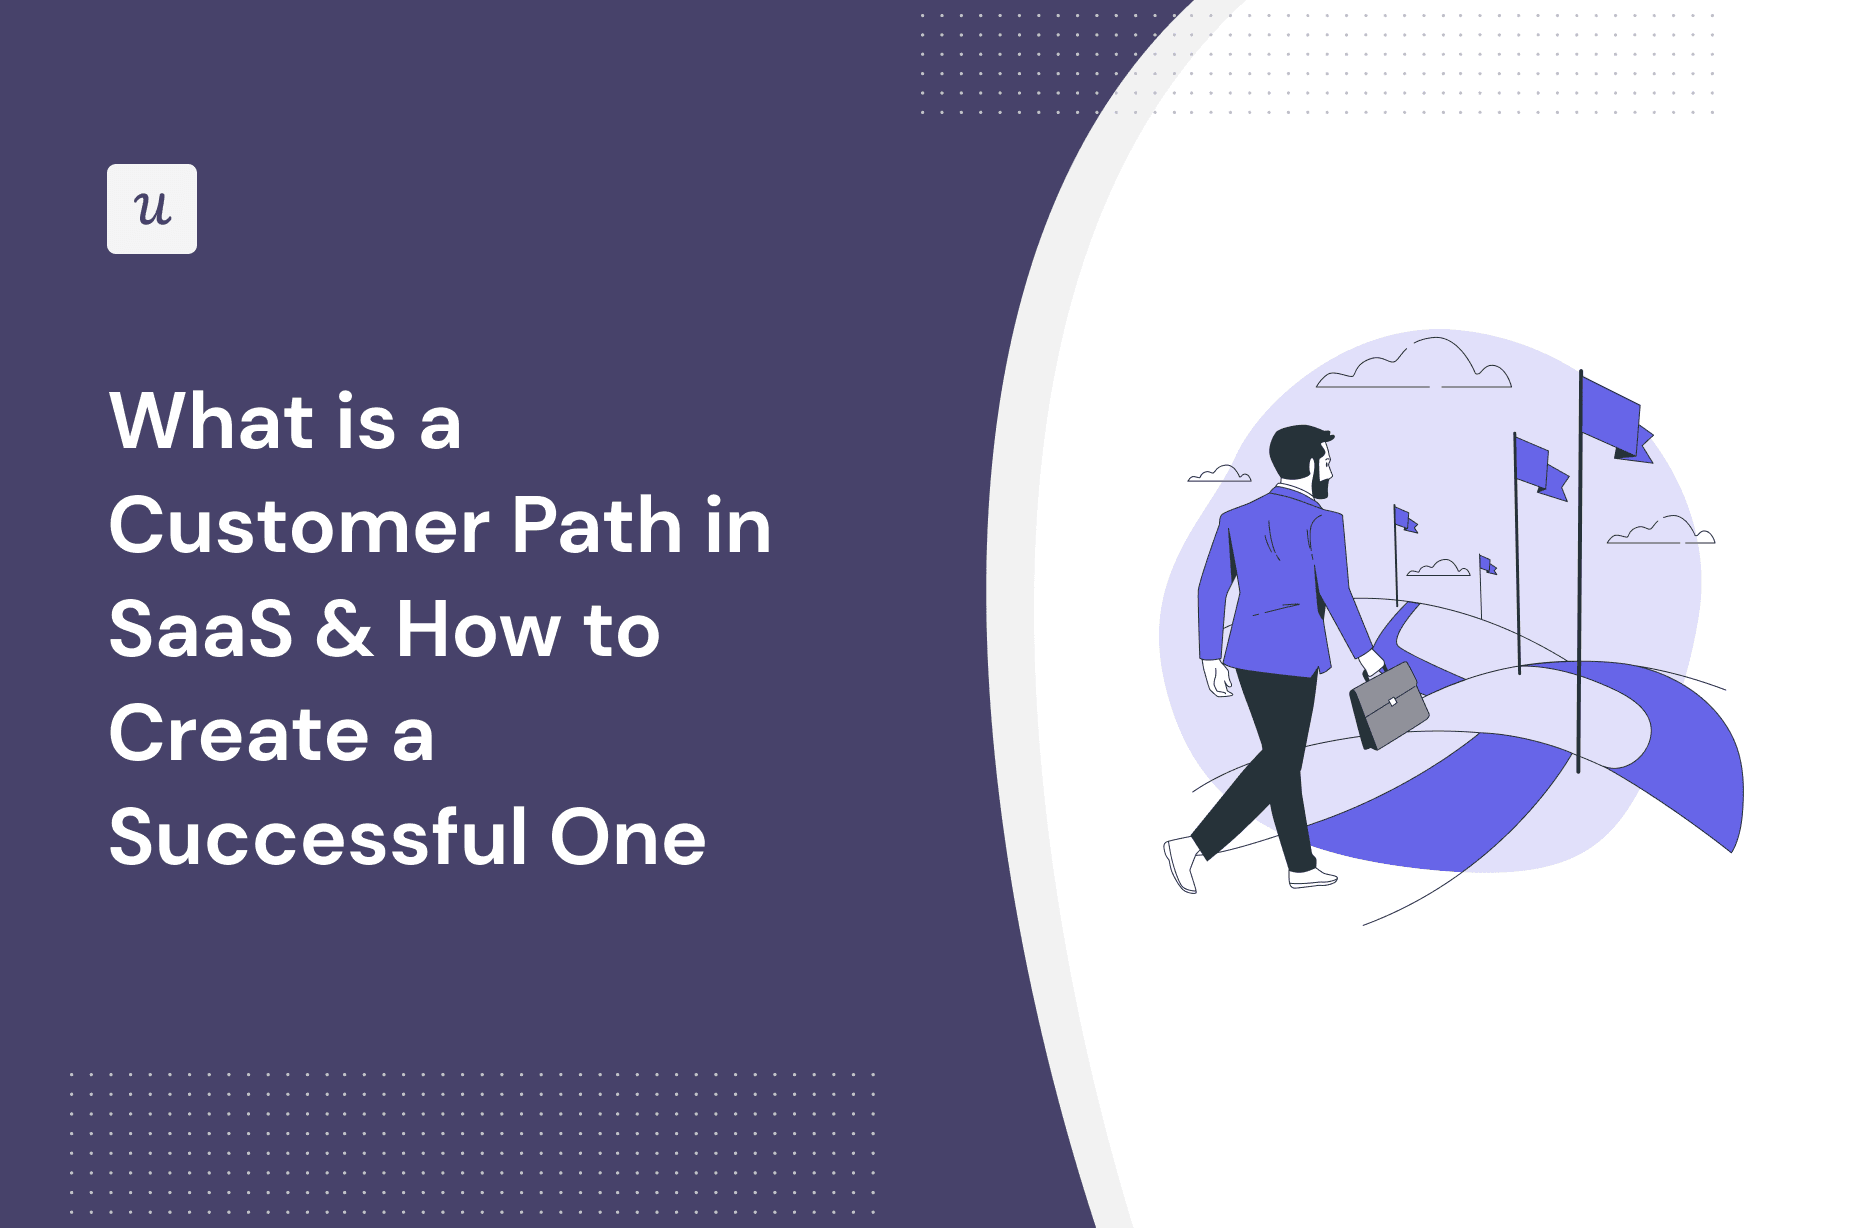 What is a Customer Path in SaaS & How to Create a Successful One cover